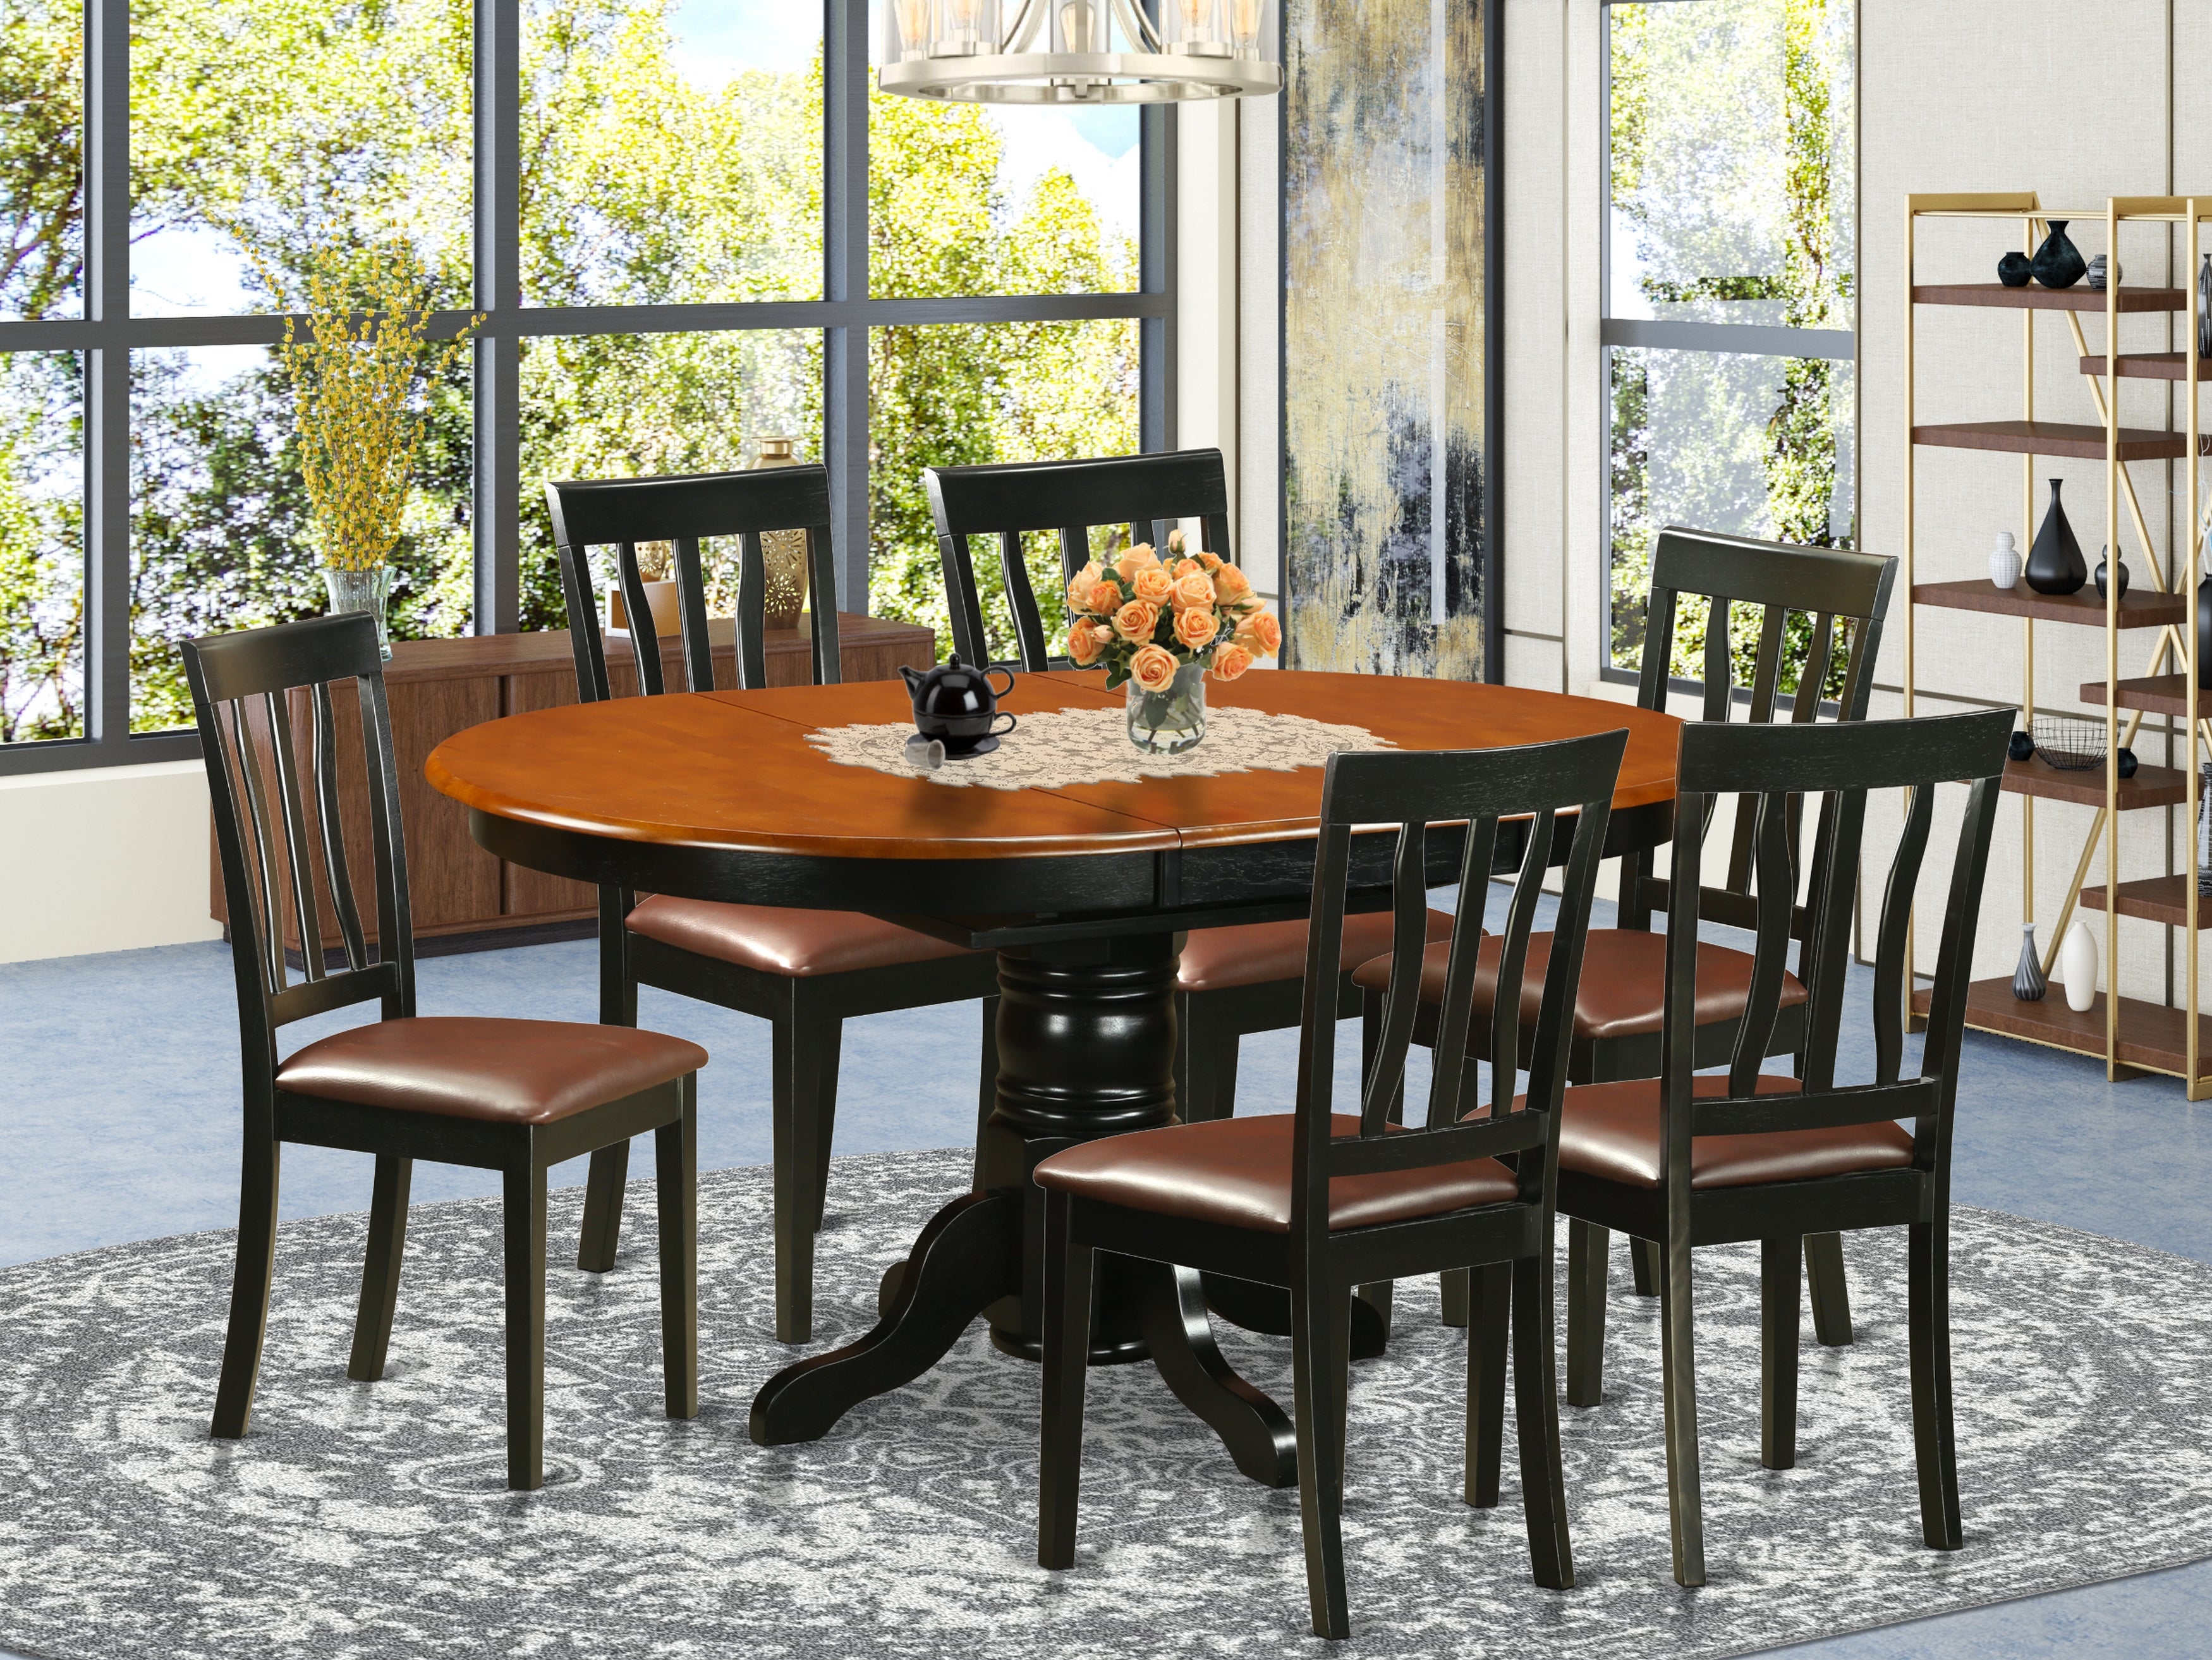 7 Pc Avon Kitchen Dining Room Table w/ leaf & 6 Chairs set In Black / Cherry